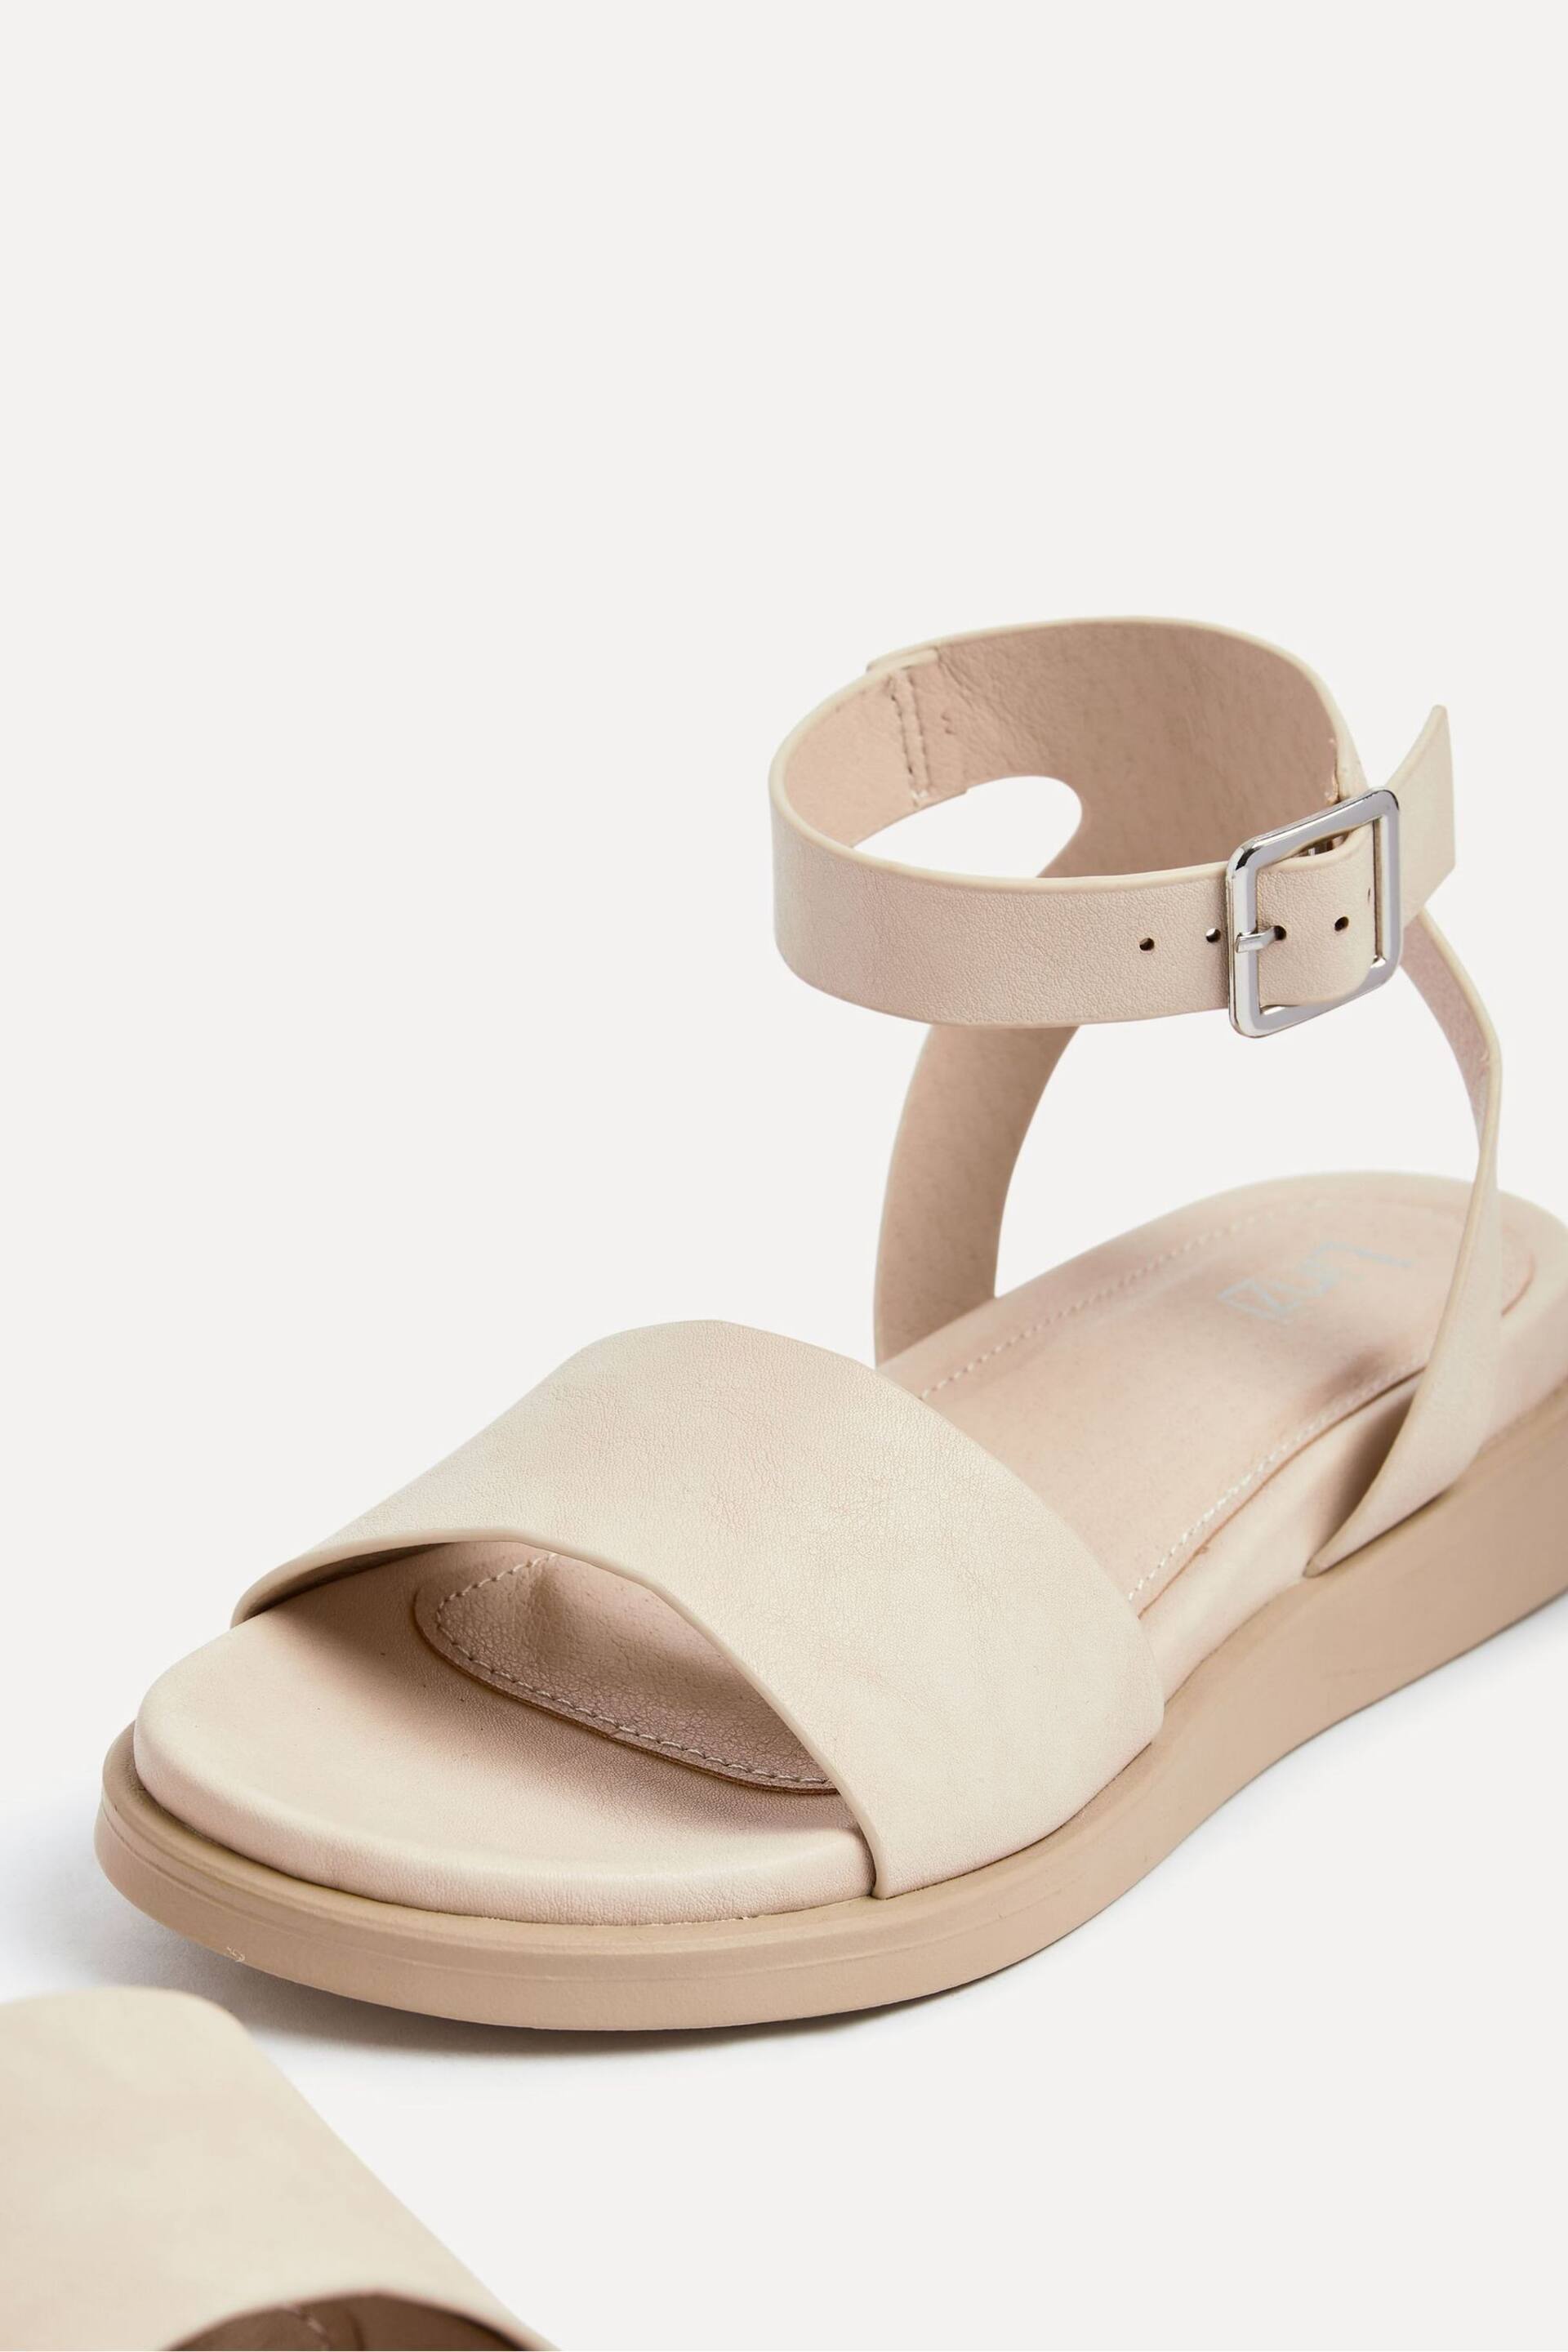 Linzi Cream Kara Two-Part Footbed Sandals - Image 5 of 5